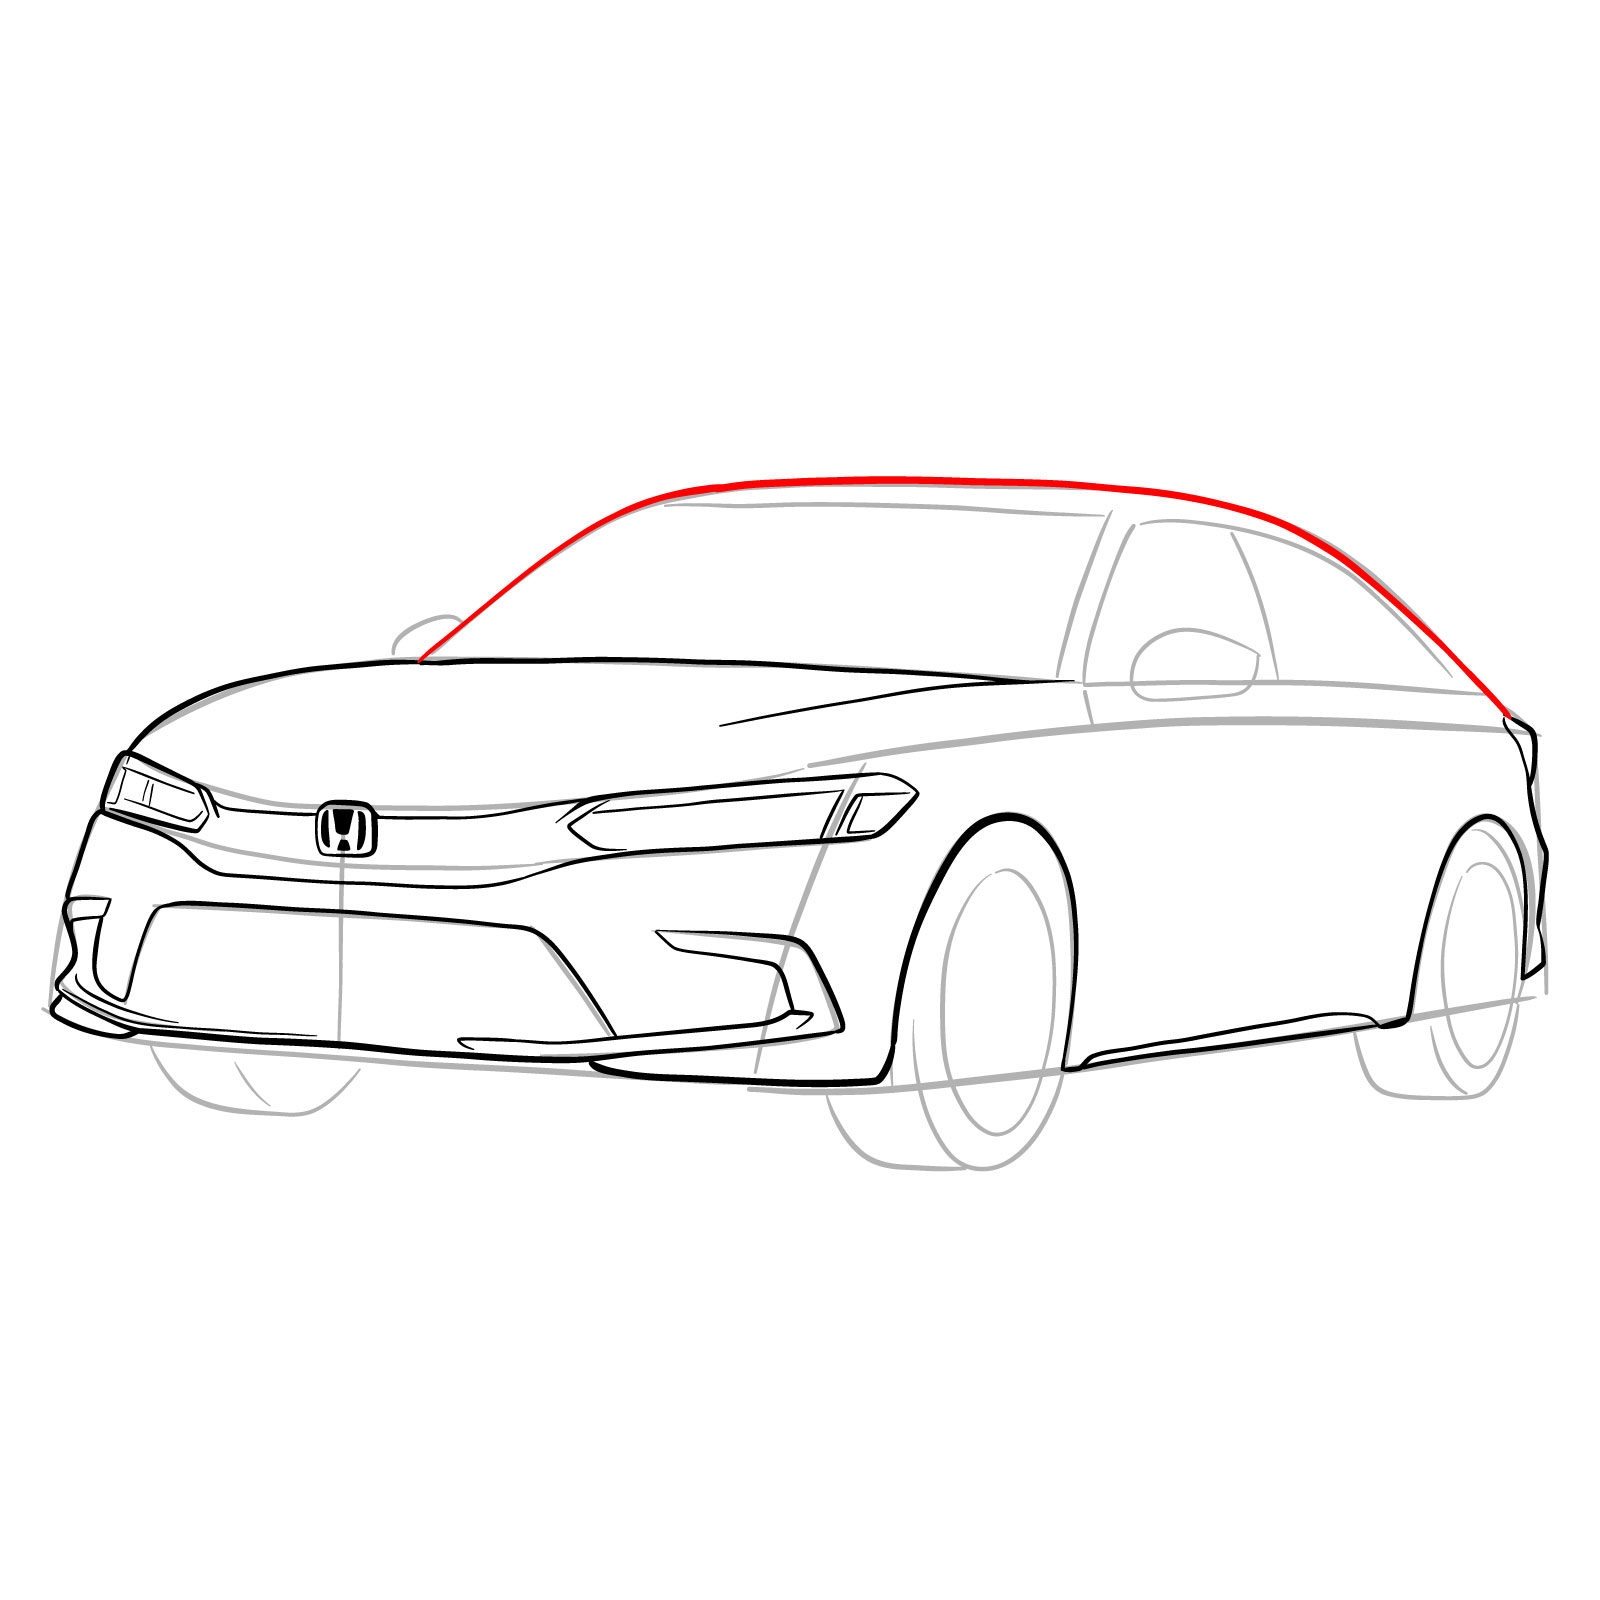 How to draw a 2022 Honda Civic - step 17